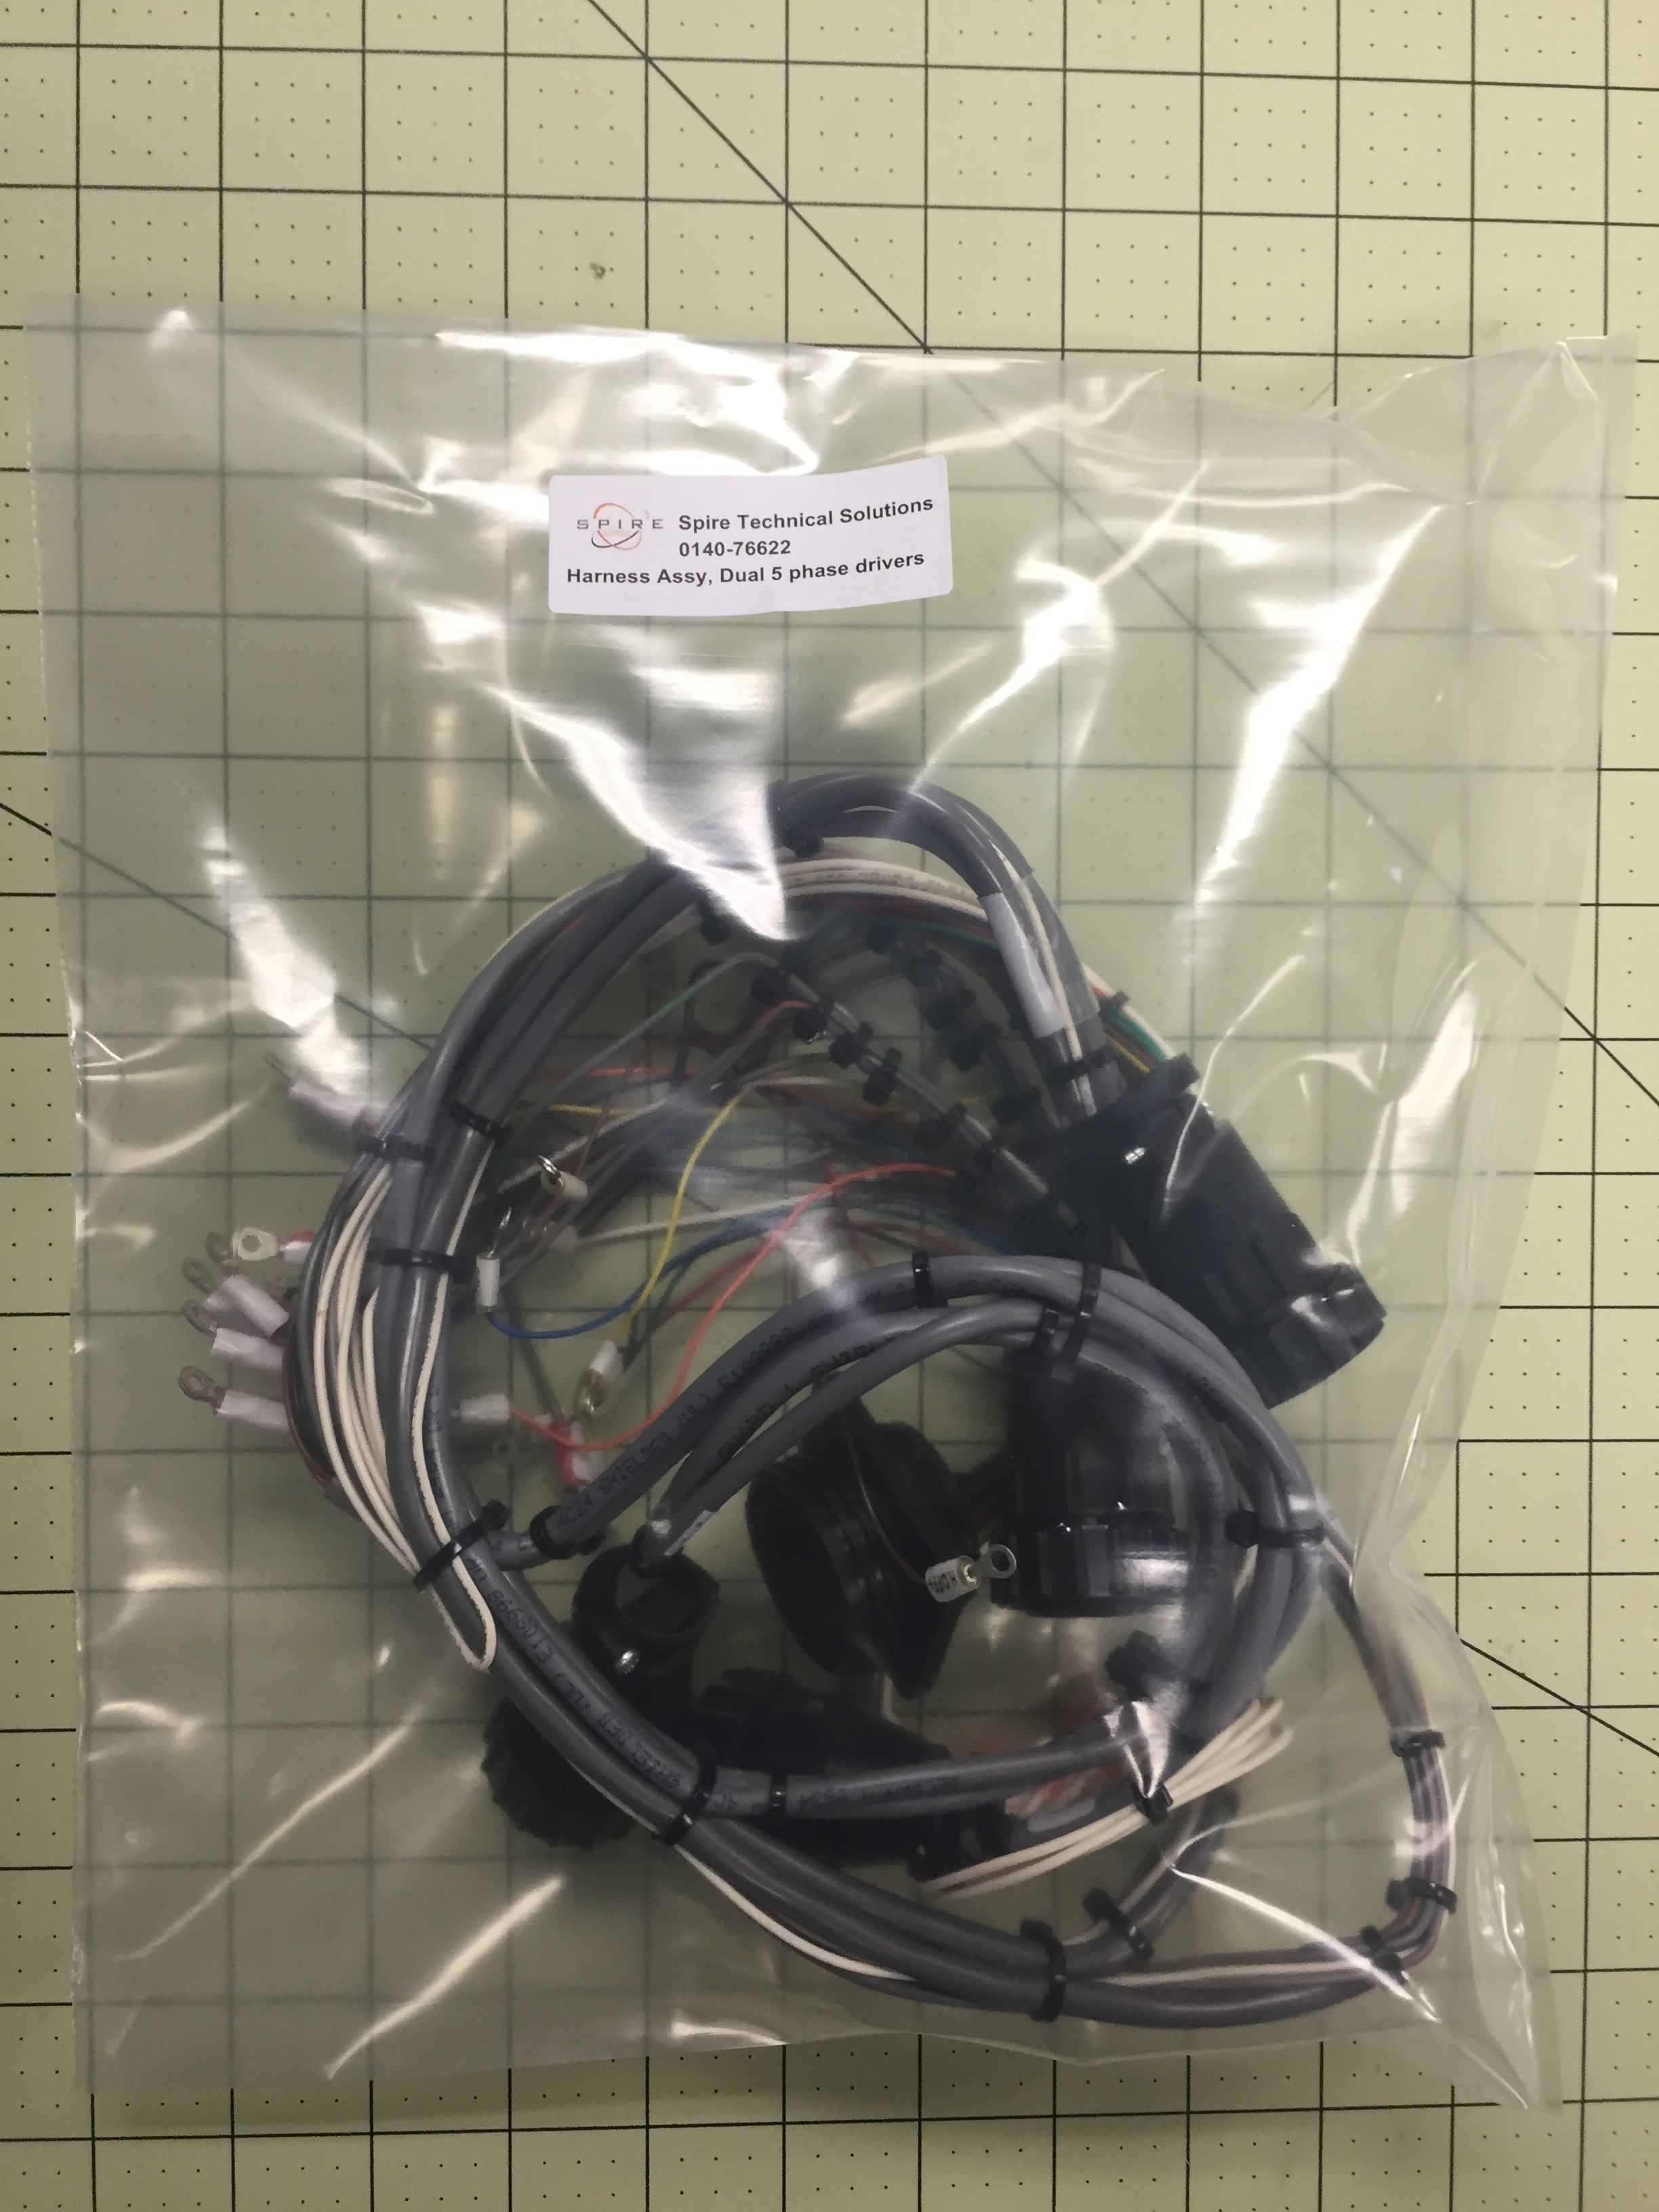 Harness Assy, Dual 5 phase driver